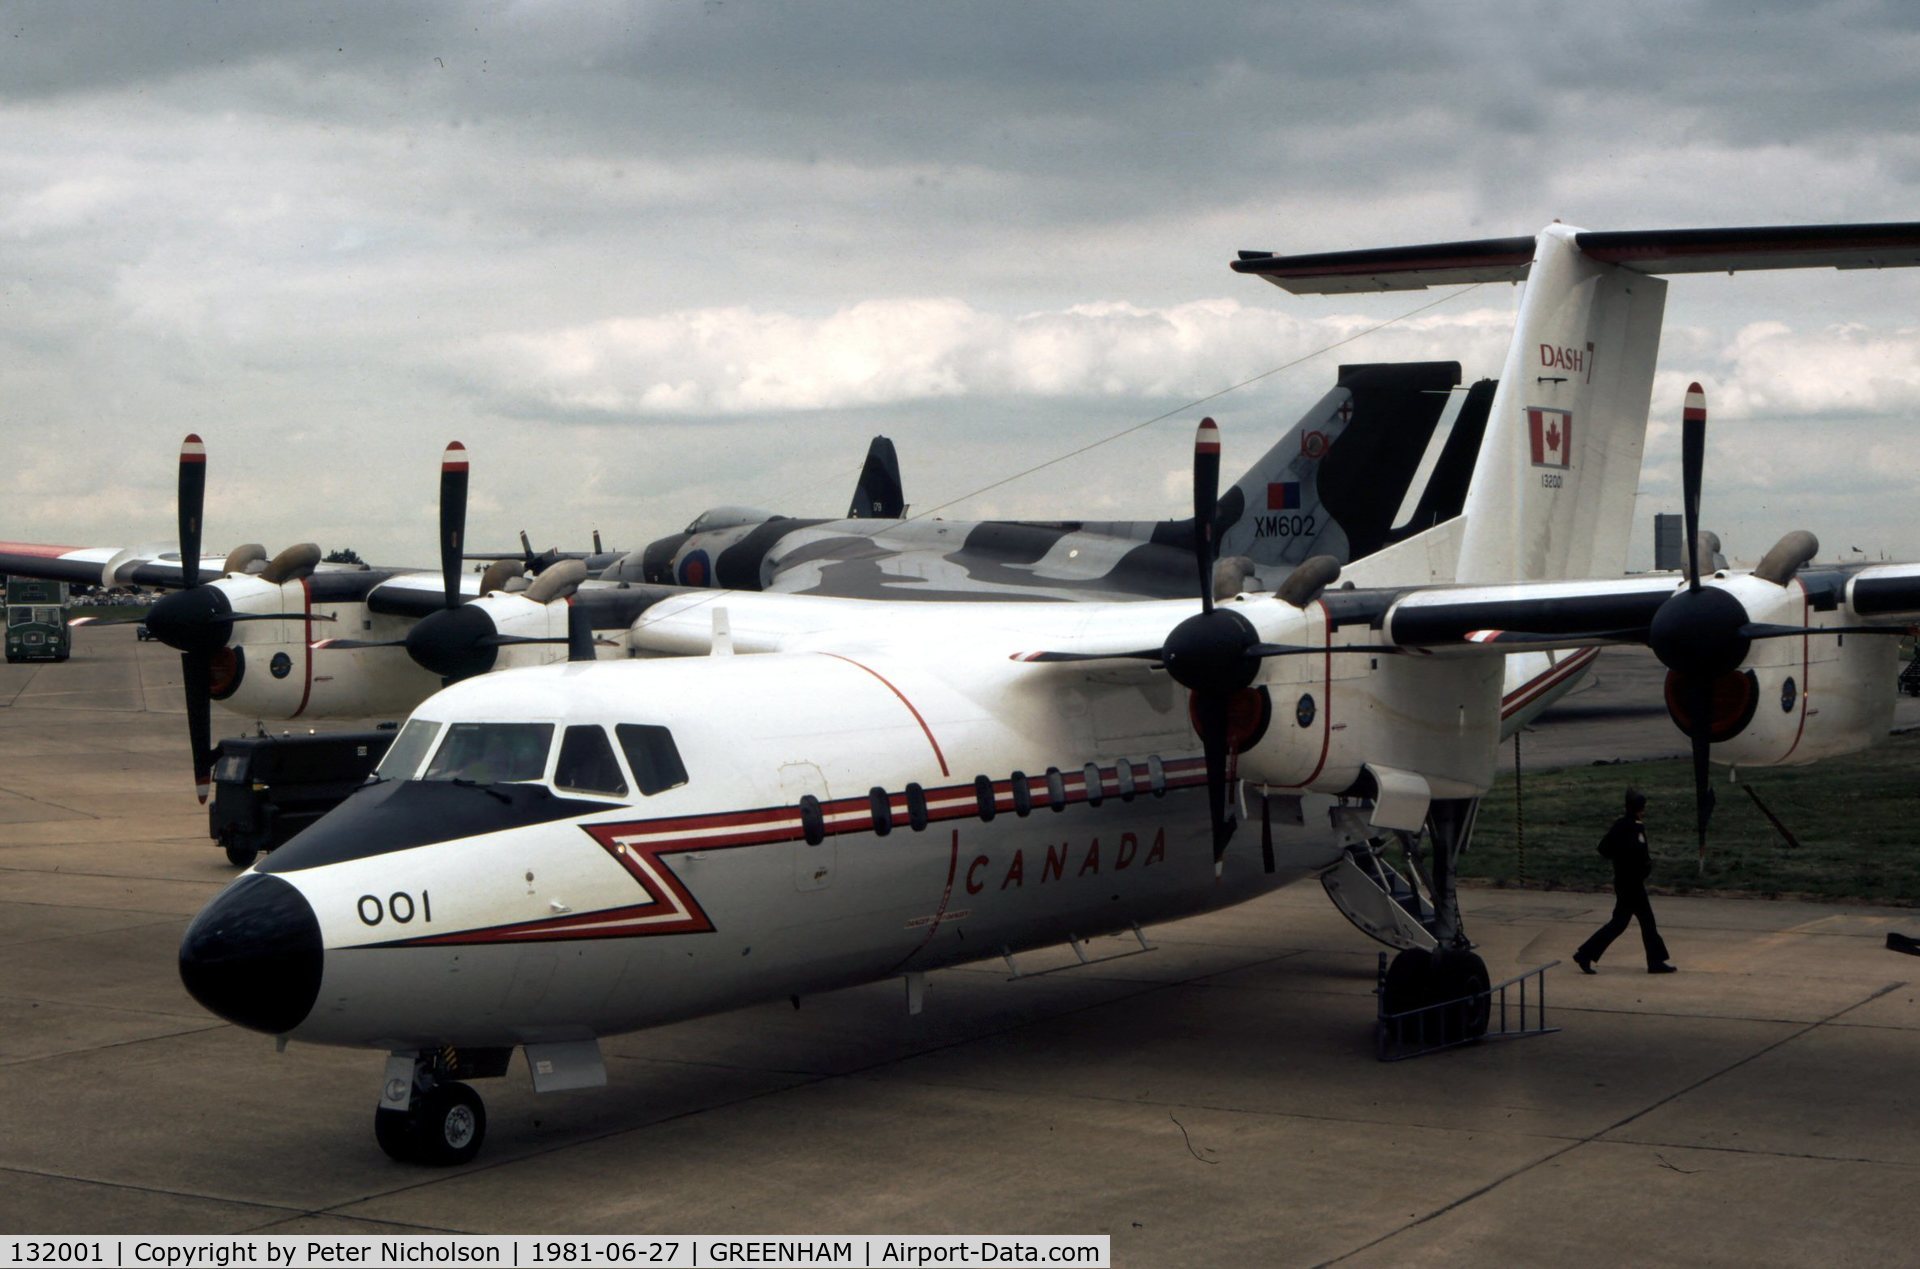 132001, 1979 De Havilland Canada CC-132 Dash 7 (DHC-7) C/N 8, Another view of the 412 Squadron Dash Seven displayed at the 1981 Intnl Air Tattoo at RAF Greenham Common.